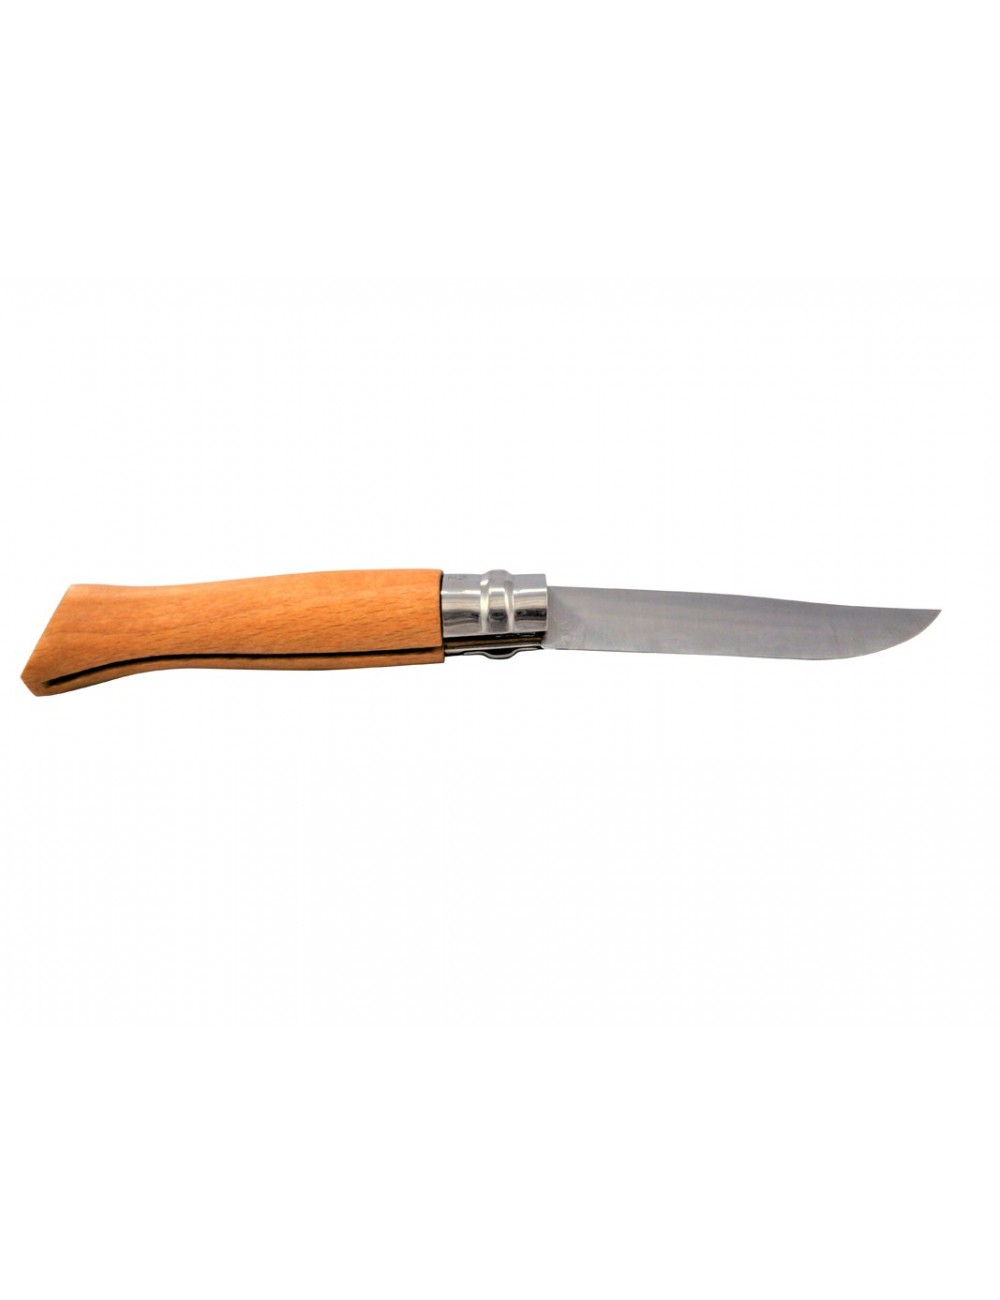 COUTEAU OPINEL N°9 - CARBONE